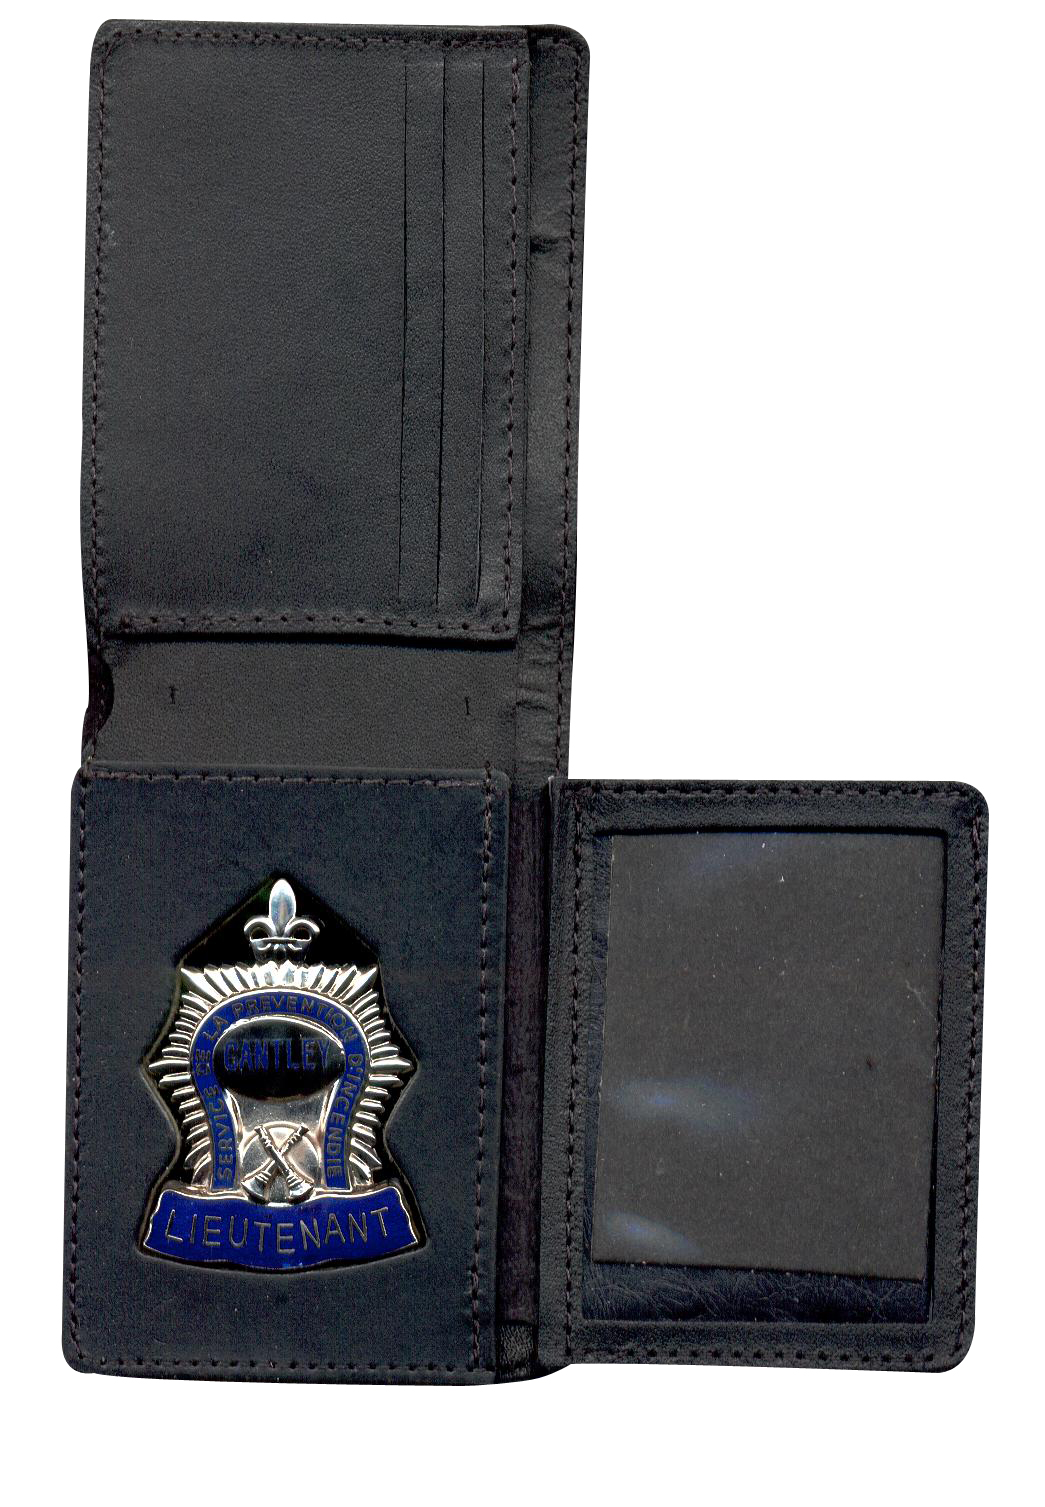 Leather Wallet for Firefighter Badge